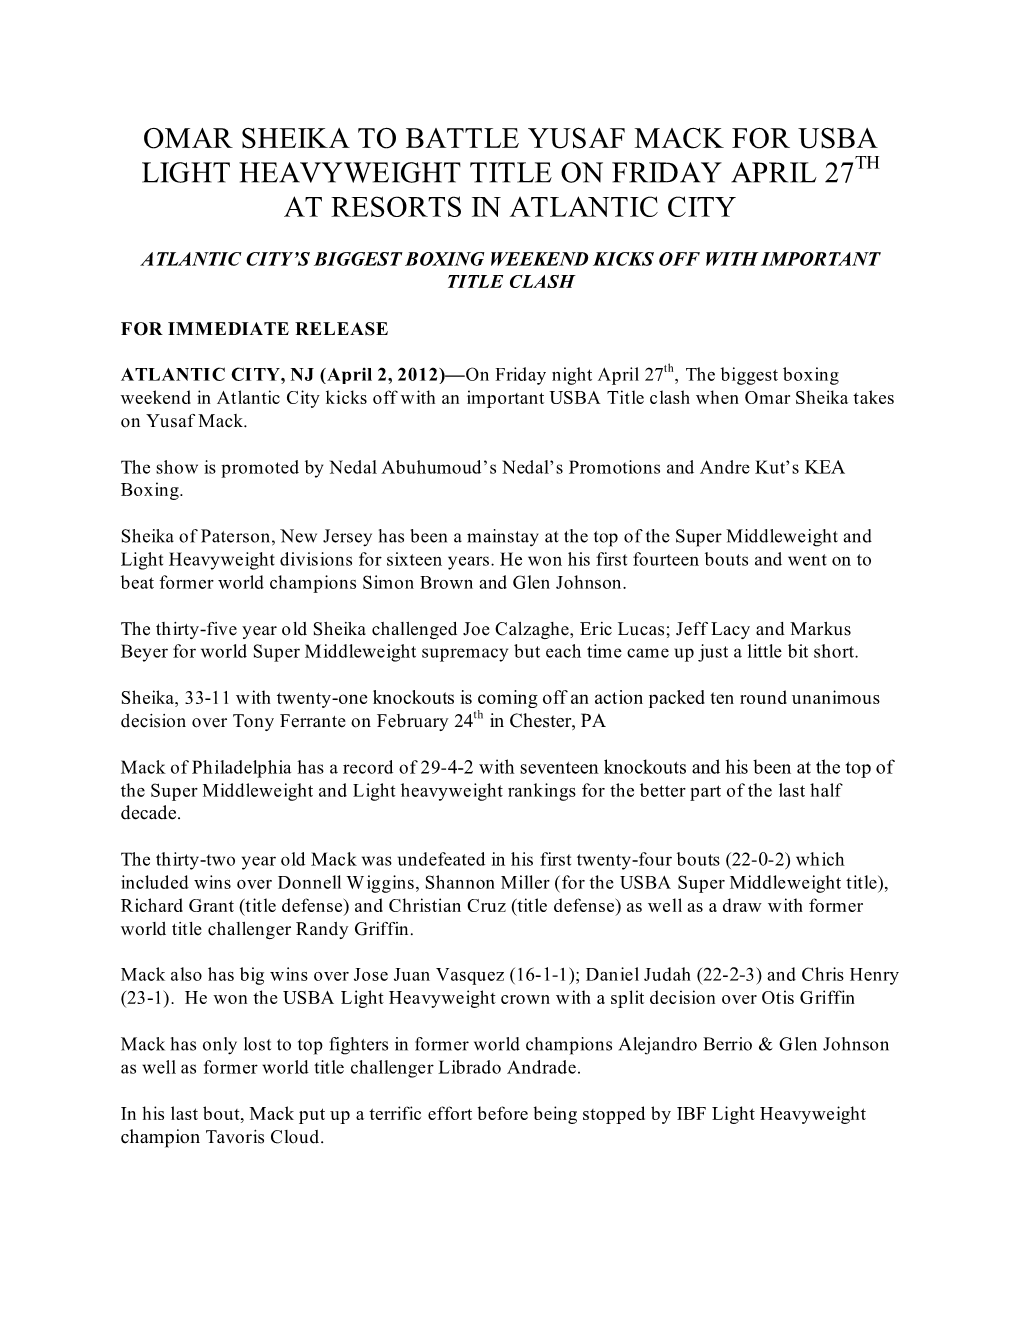 Omar Sheika to Battle Yusaf Mack for Usba Light Heavyweight Title on Friday April 27Th at Resorts in Atlantic City